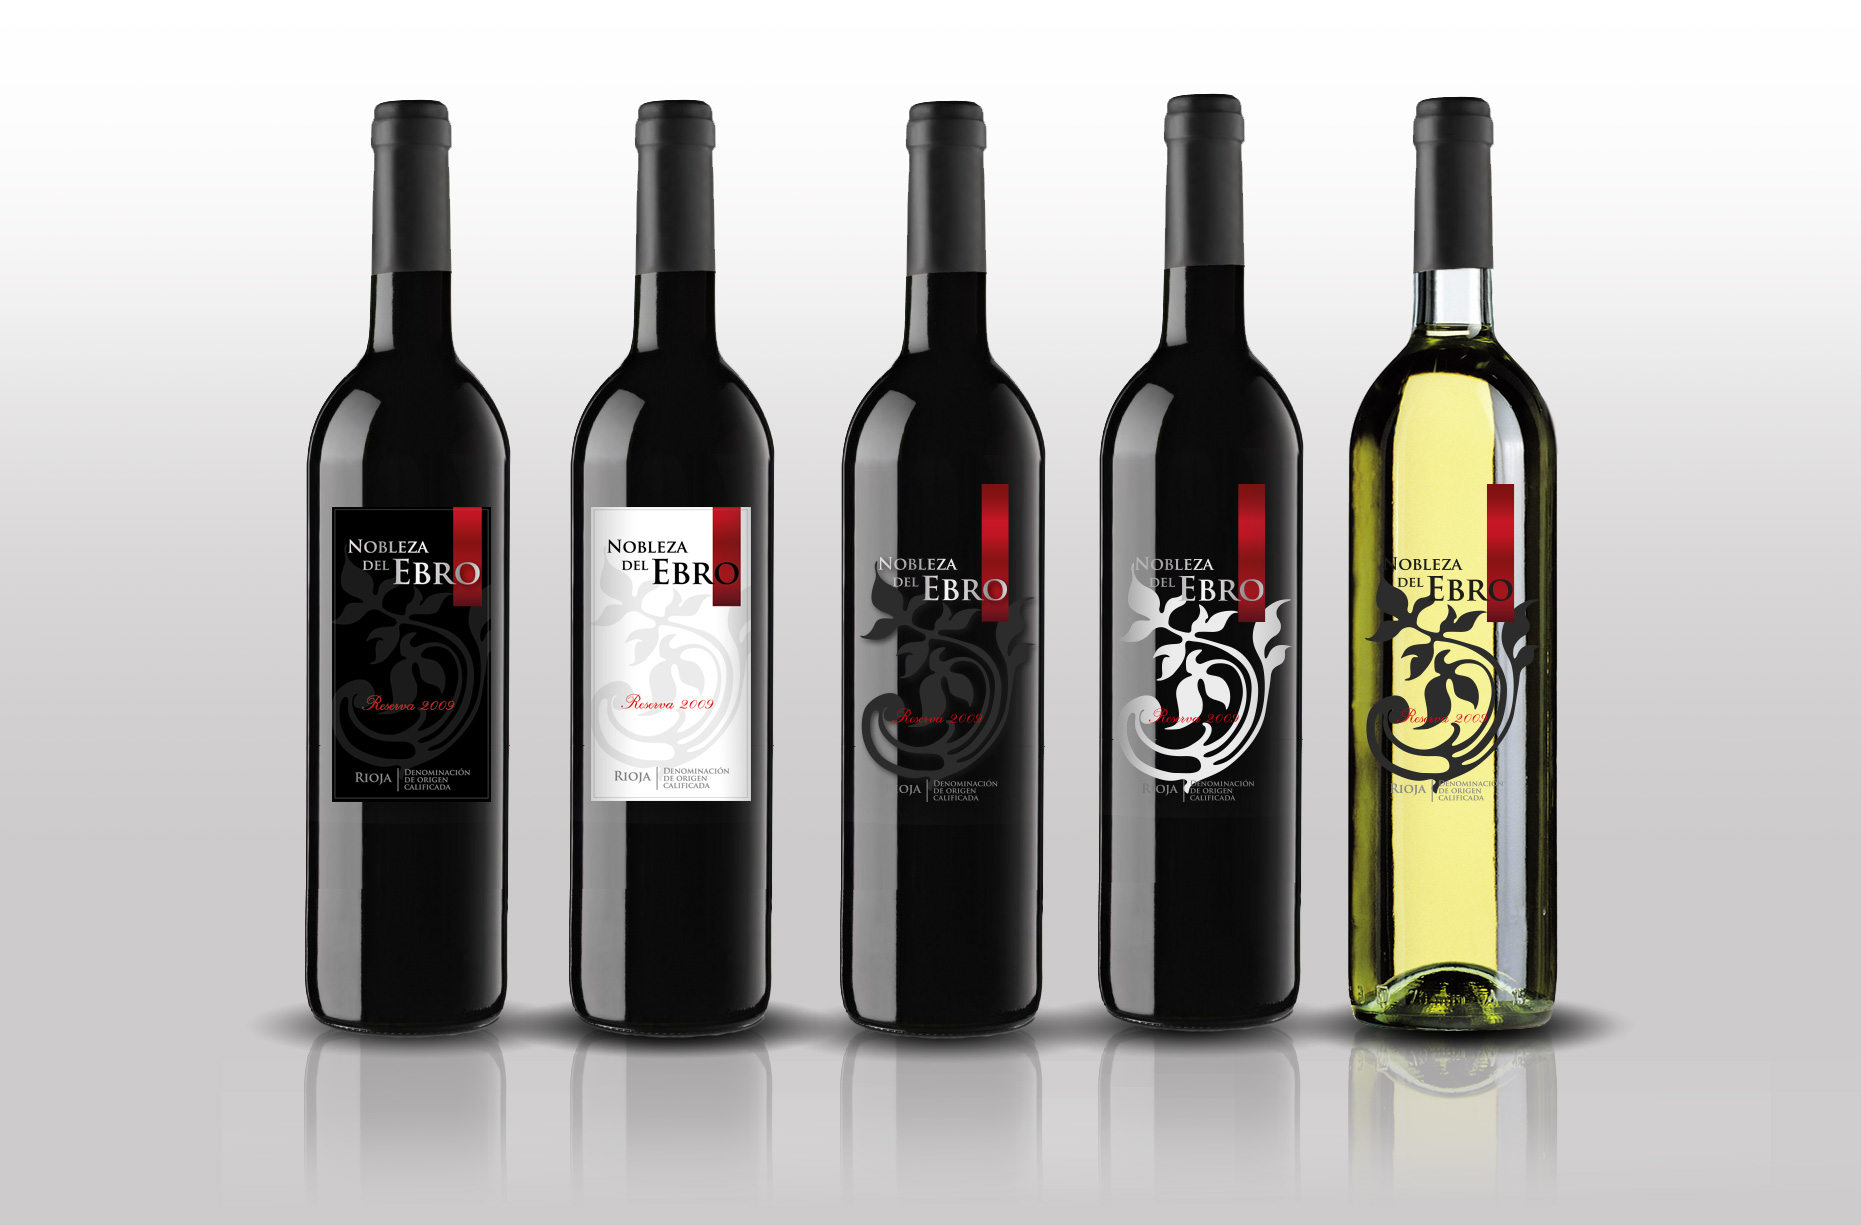 Portfolio of graphic and creative design works of wine labels and packaging for Spanish wine of domination of qualified origin SOMONTANO